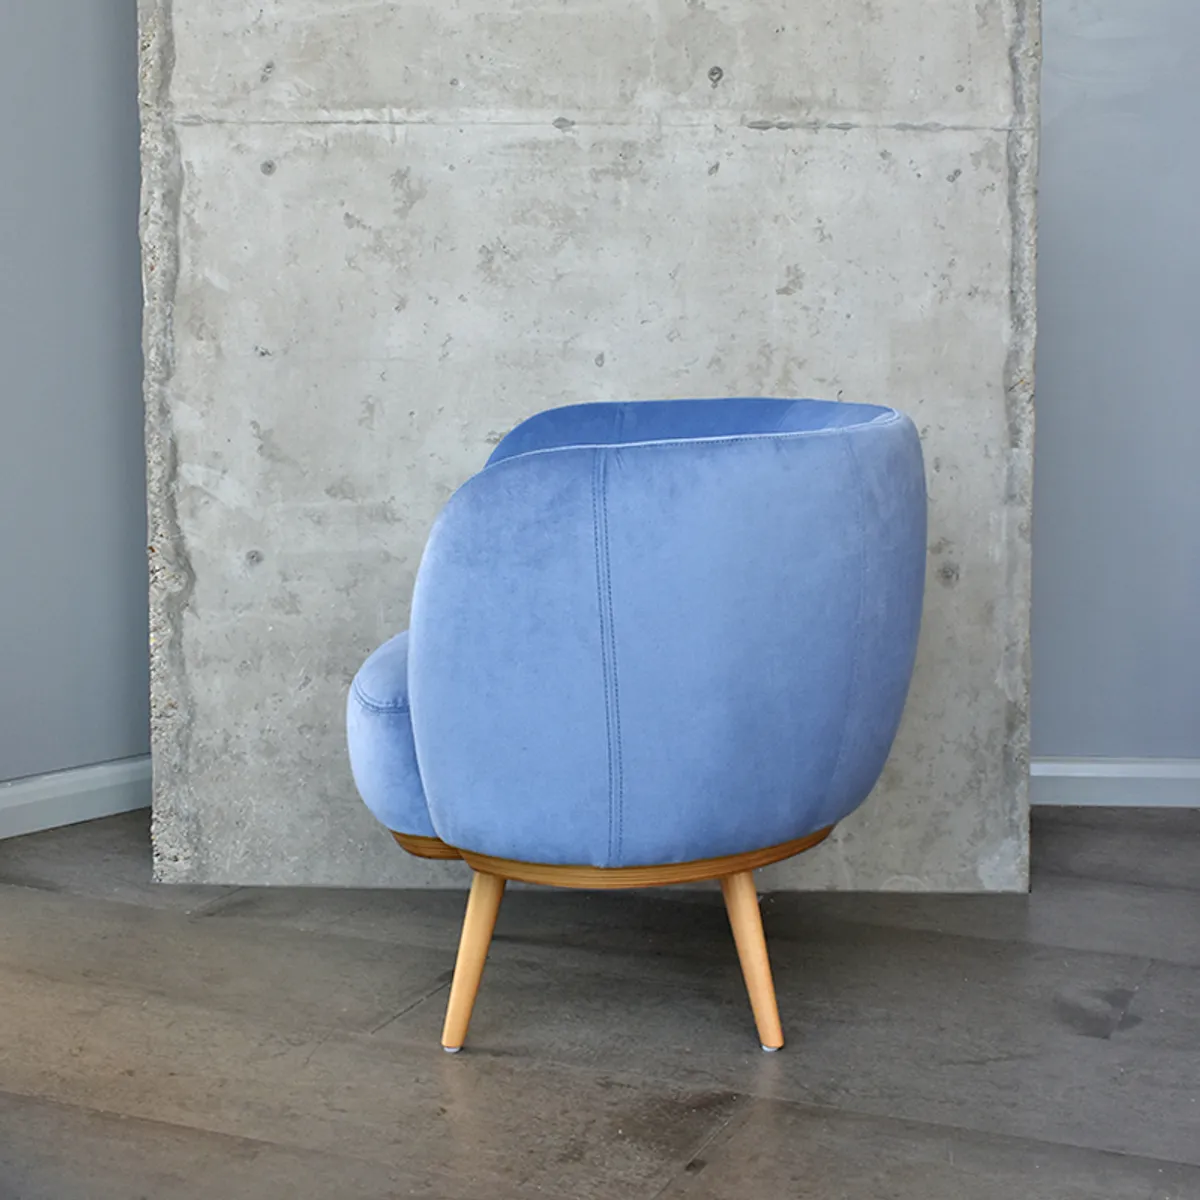 Cosmo Lounge Chair New Furniture From Milan 2019 By Inside Out Contracts 010